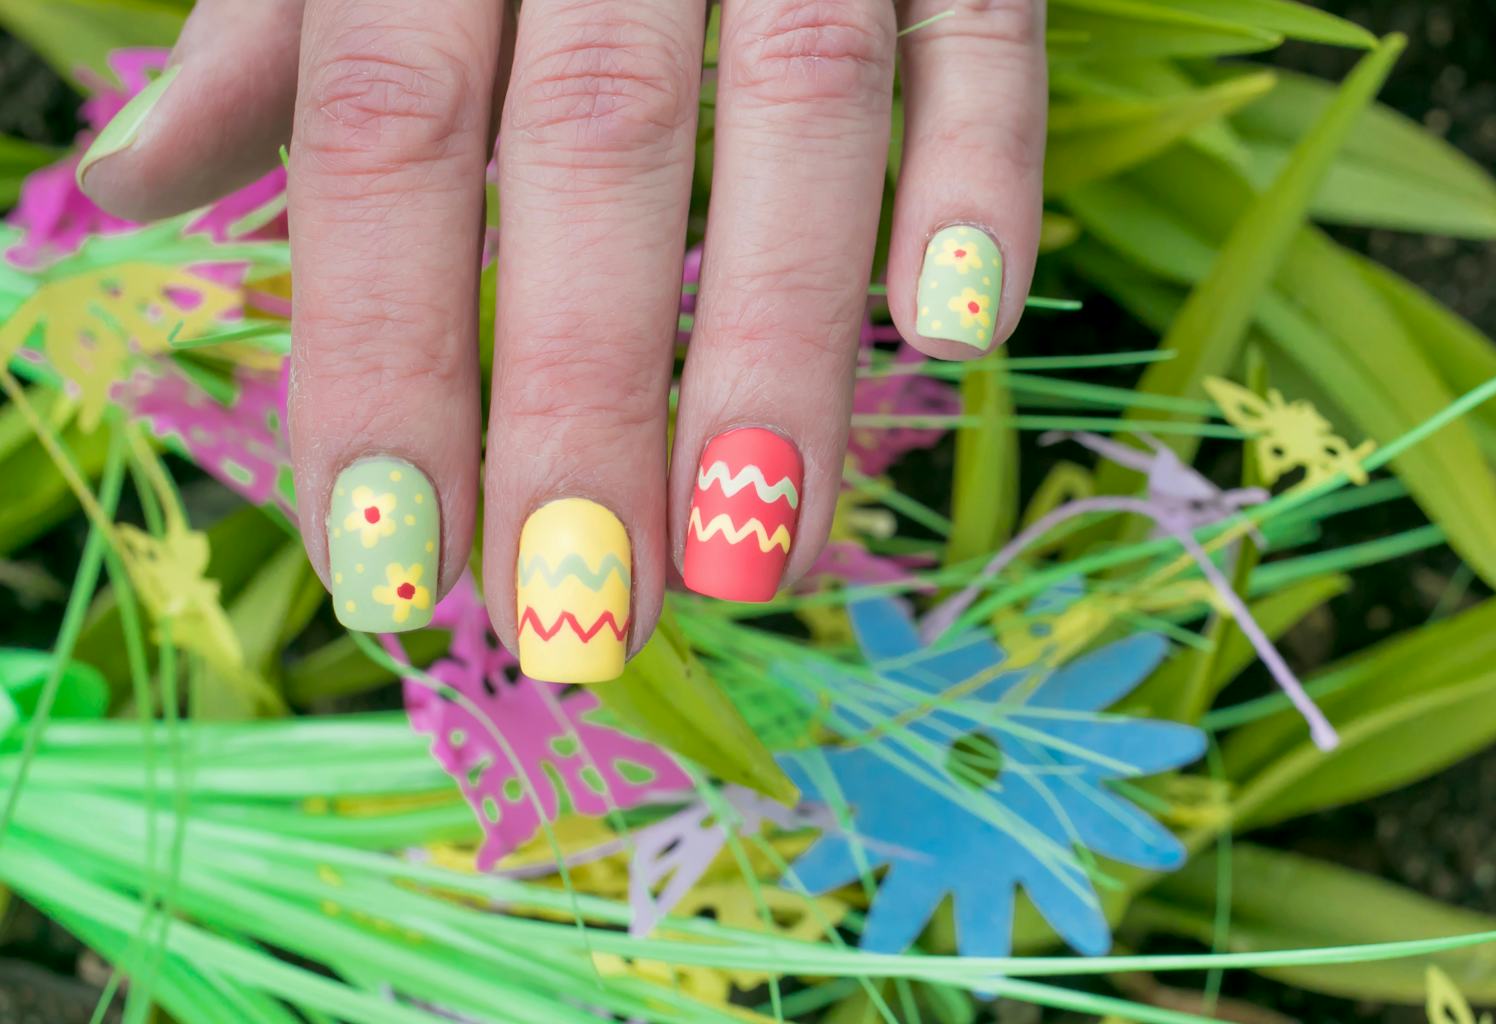 1. Cute and Colorful Easter Nail Design Ideas - wide 5